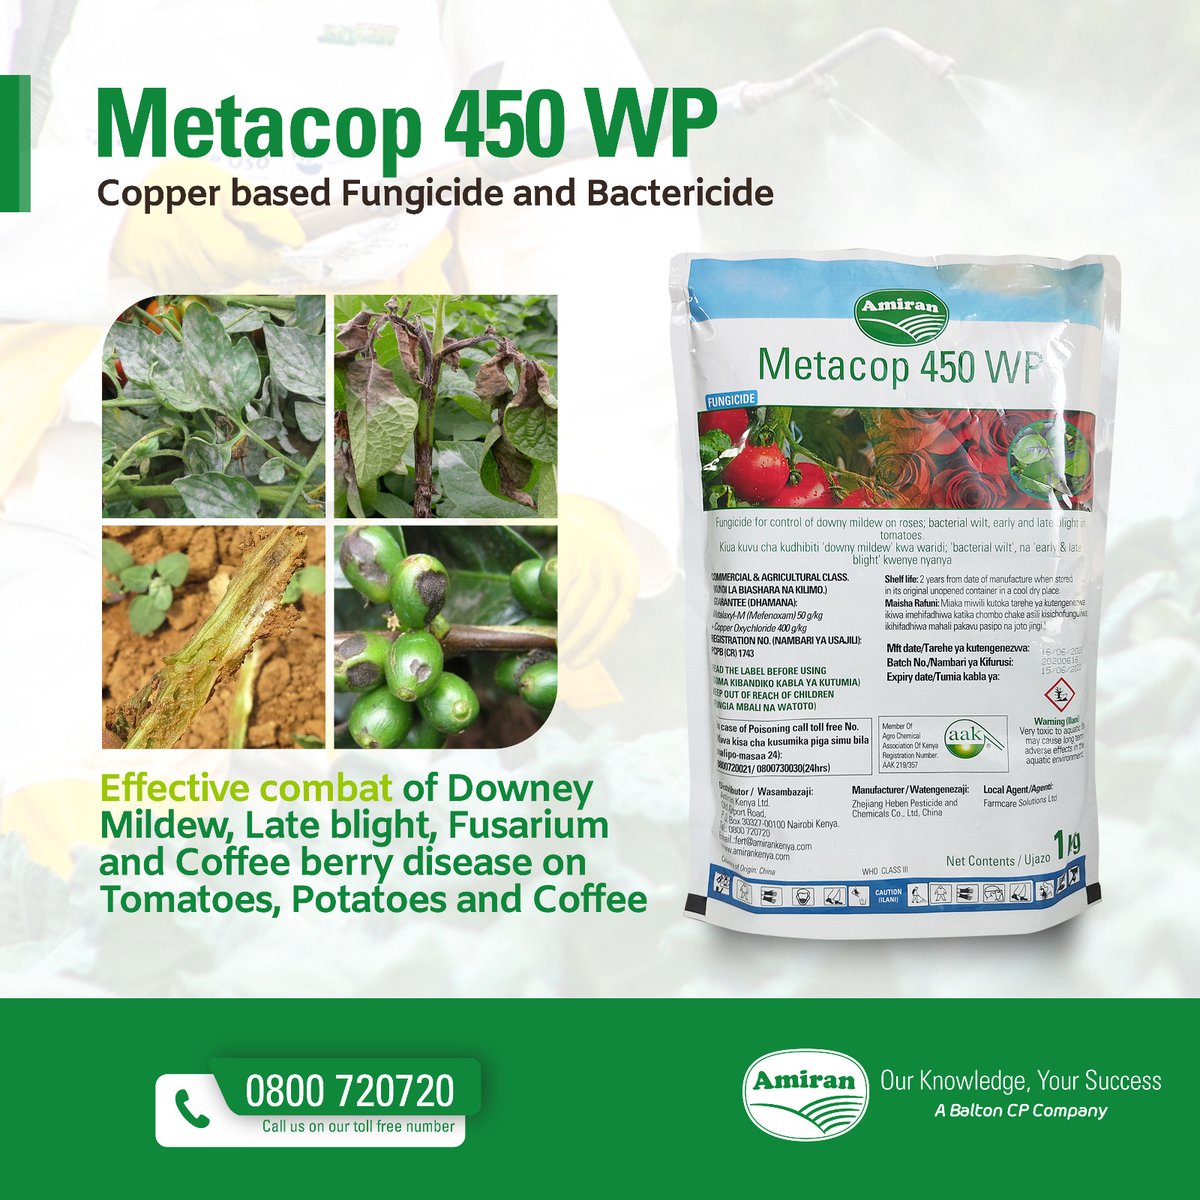 Metacop 450 WP is an advanced fungicide offering both preventive and curative properties. With a broad spectrum of activity, it effectively manages bacterial and fungal infections. Key Info: Call us toll-free at 0800720720. Our team of experts is happy to assist you.